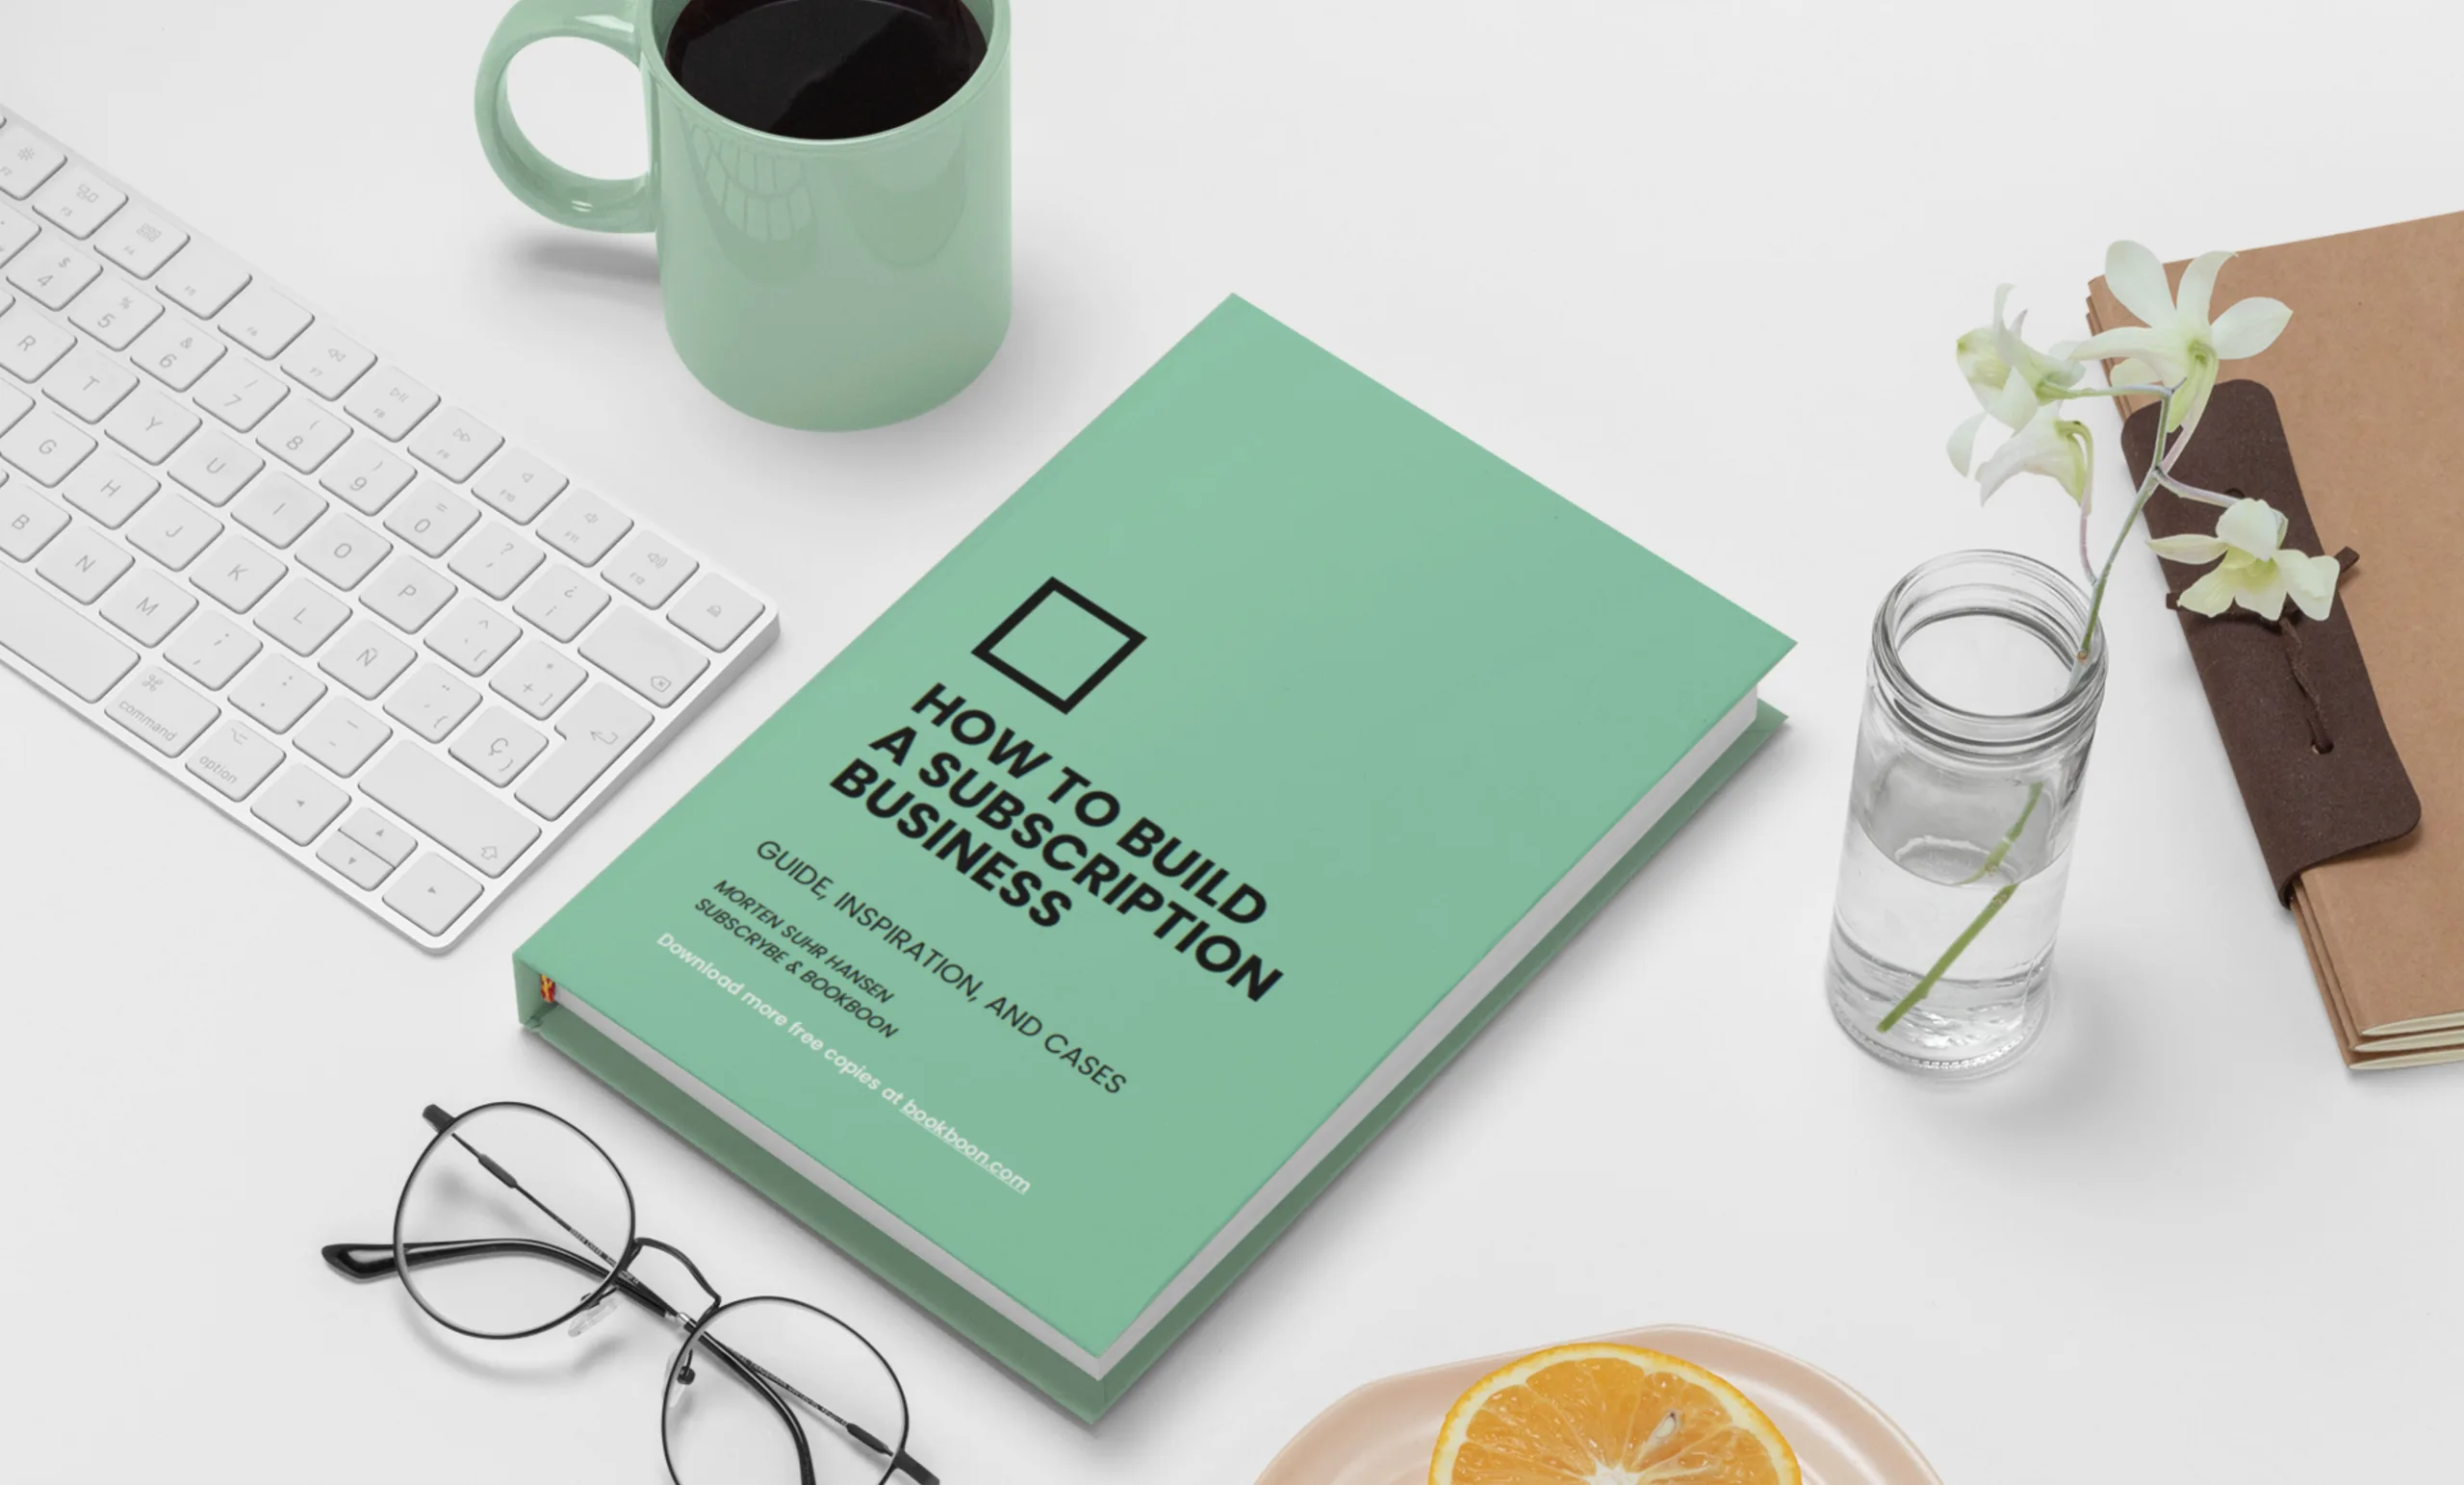 How to build a subscription business book